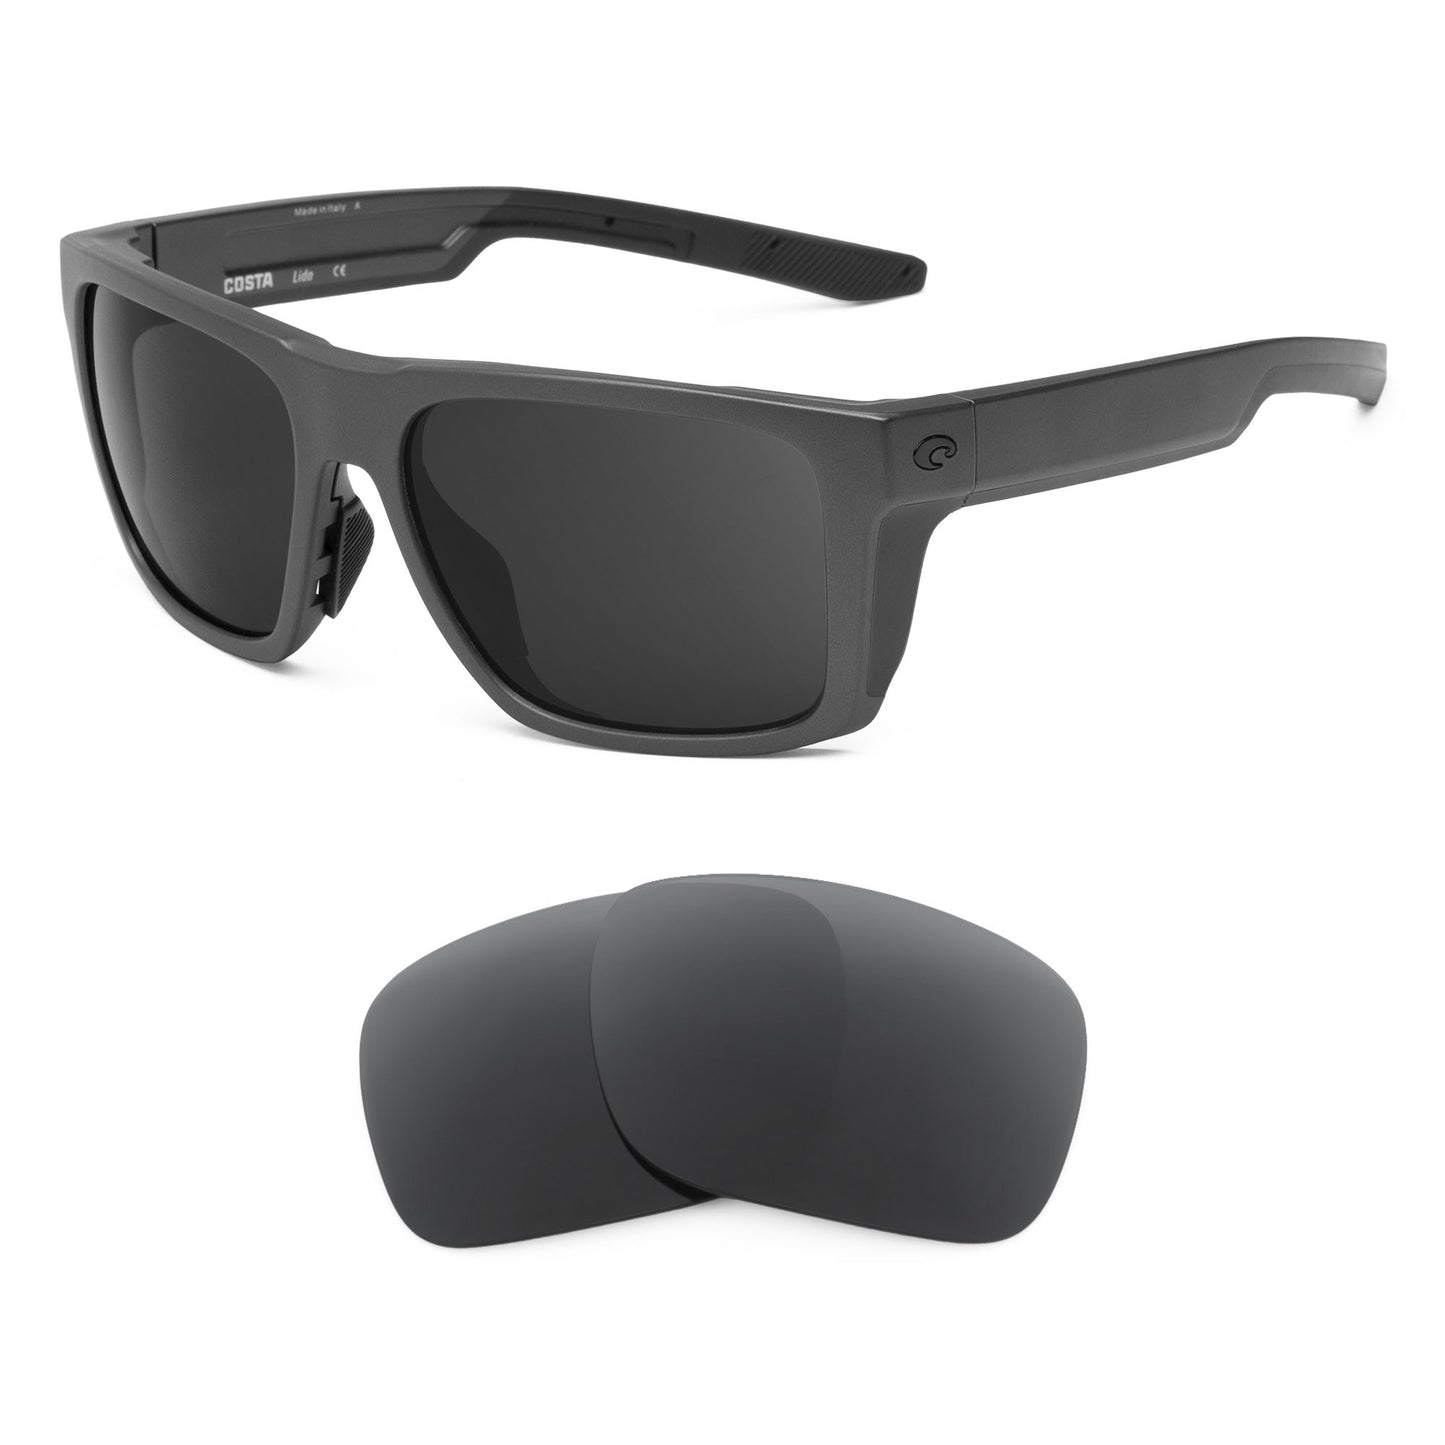 Costa Lido sunglasses with replacement lenses